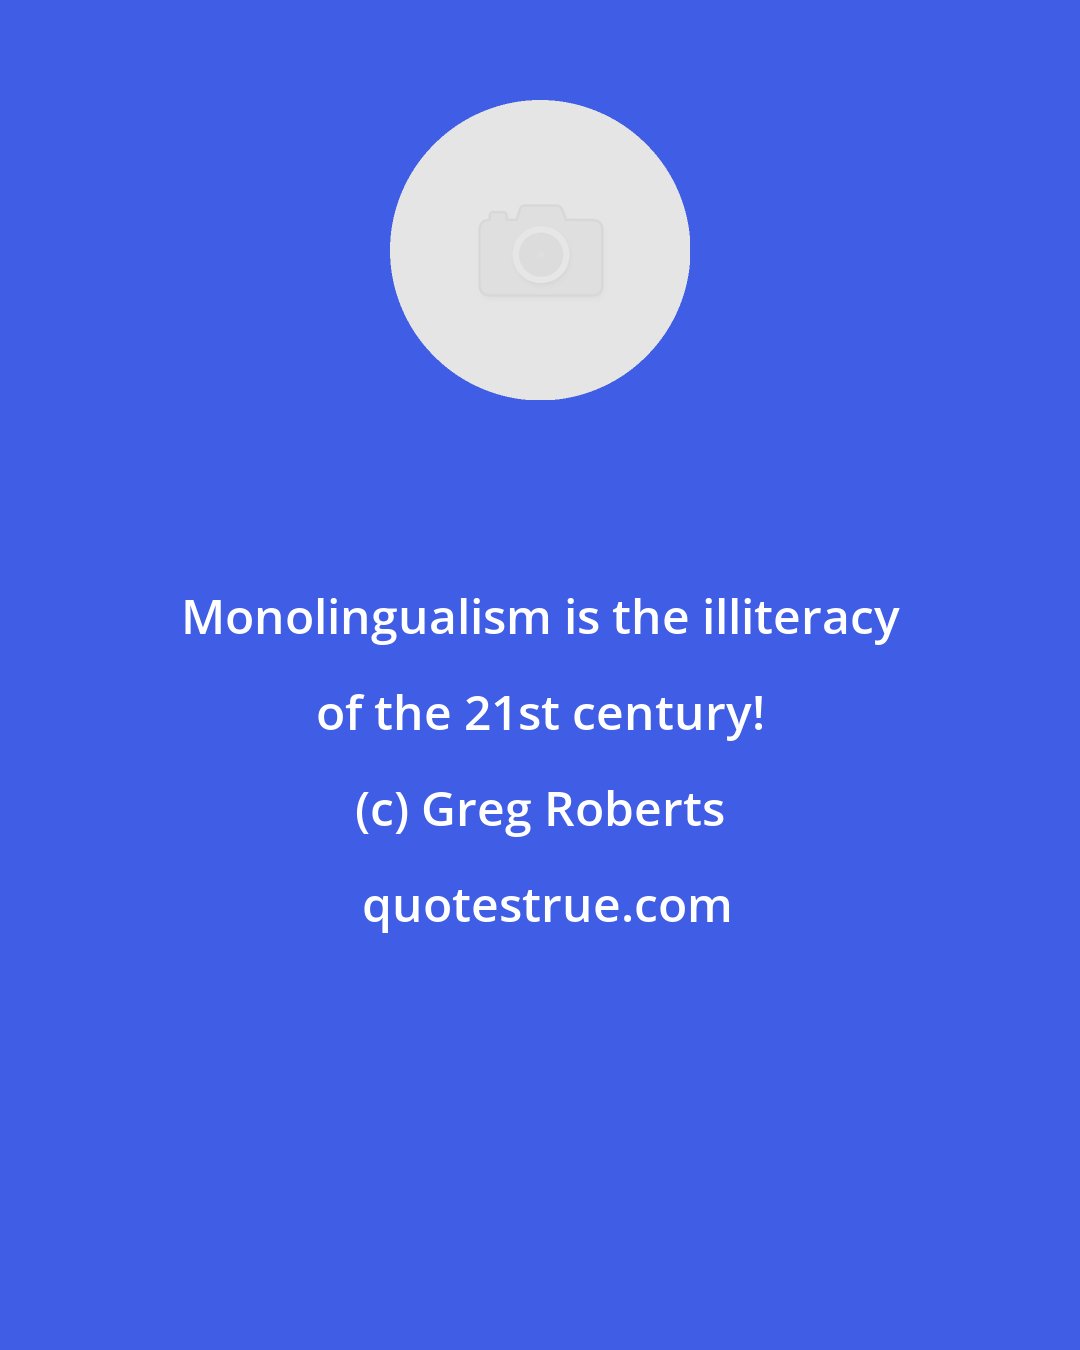 Greg Roberts: Monolingualism is the illiteracy of the 21st century!